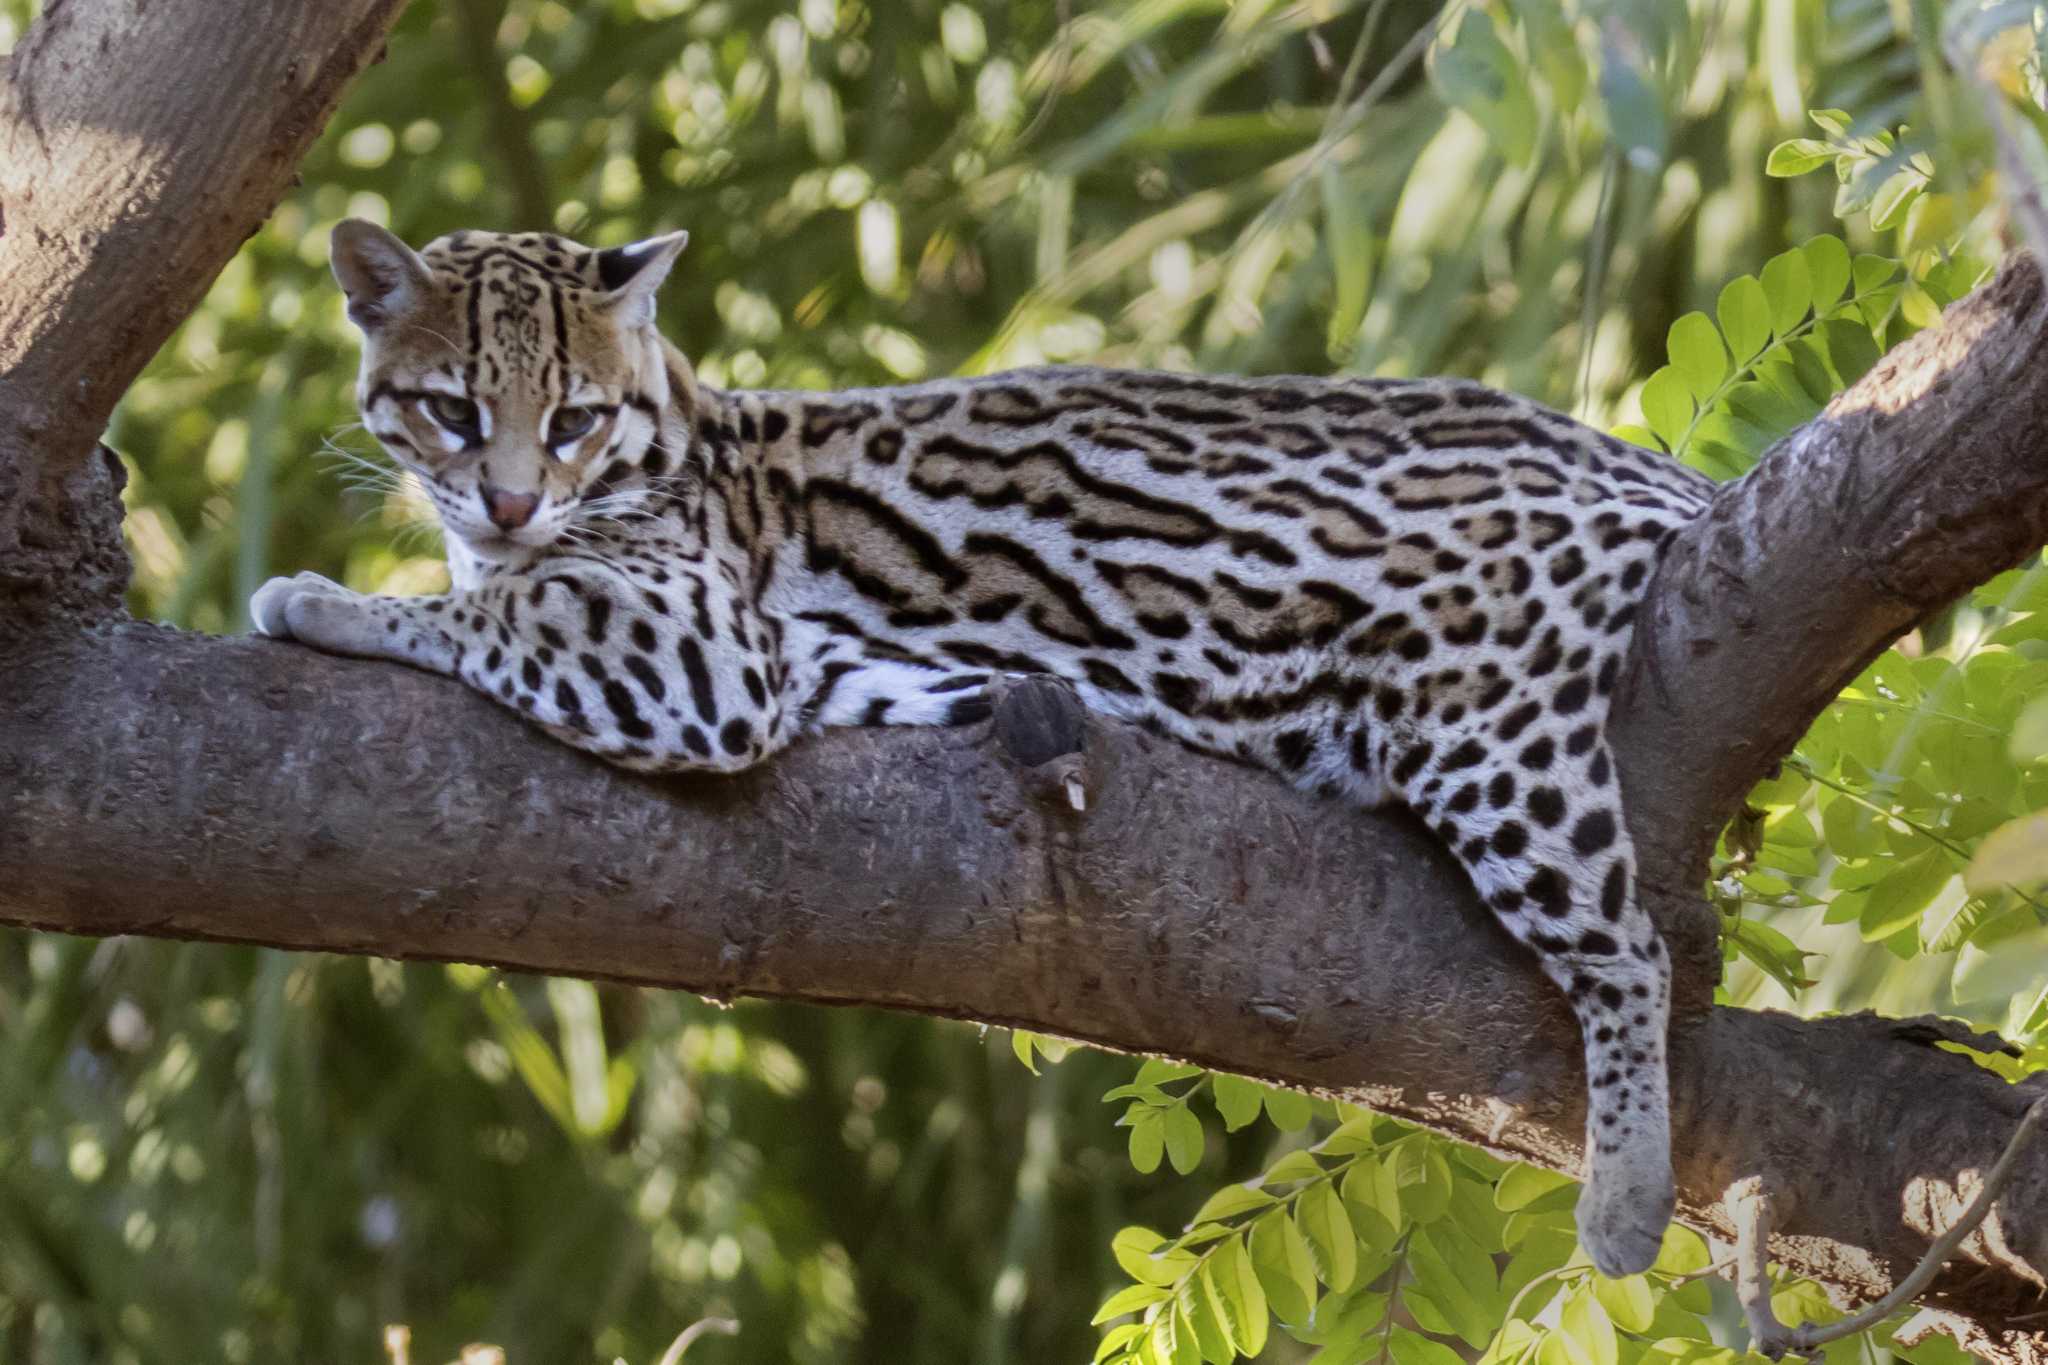 Should the United States and Mexico cooperate to save the ocelot?